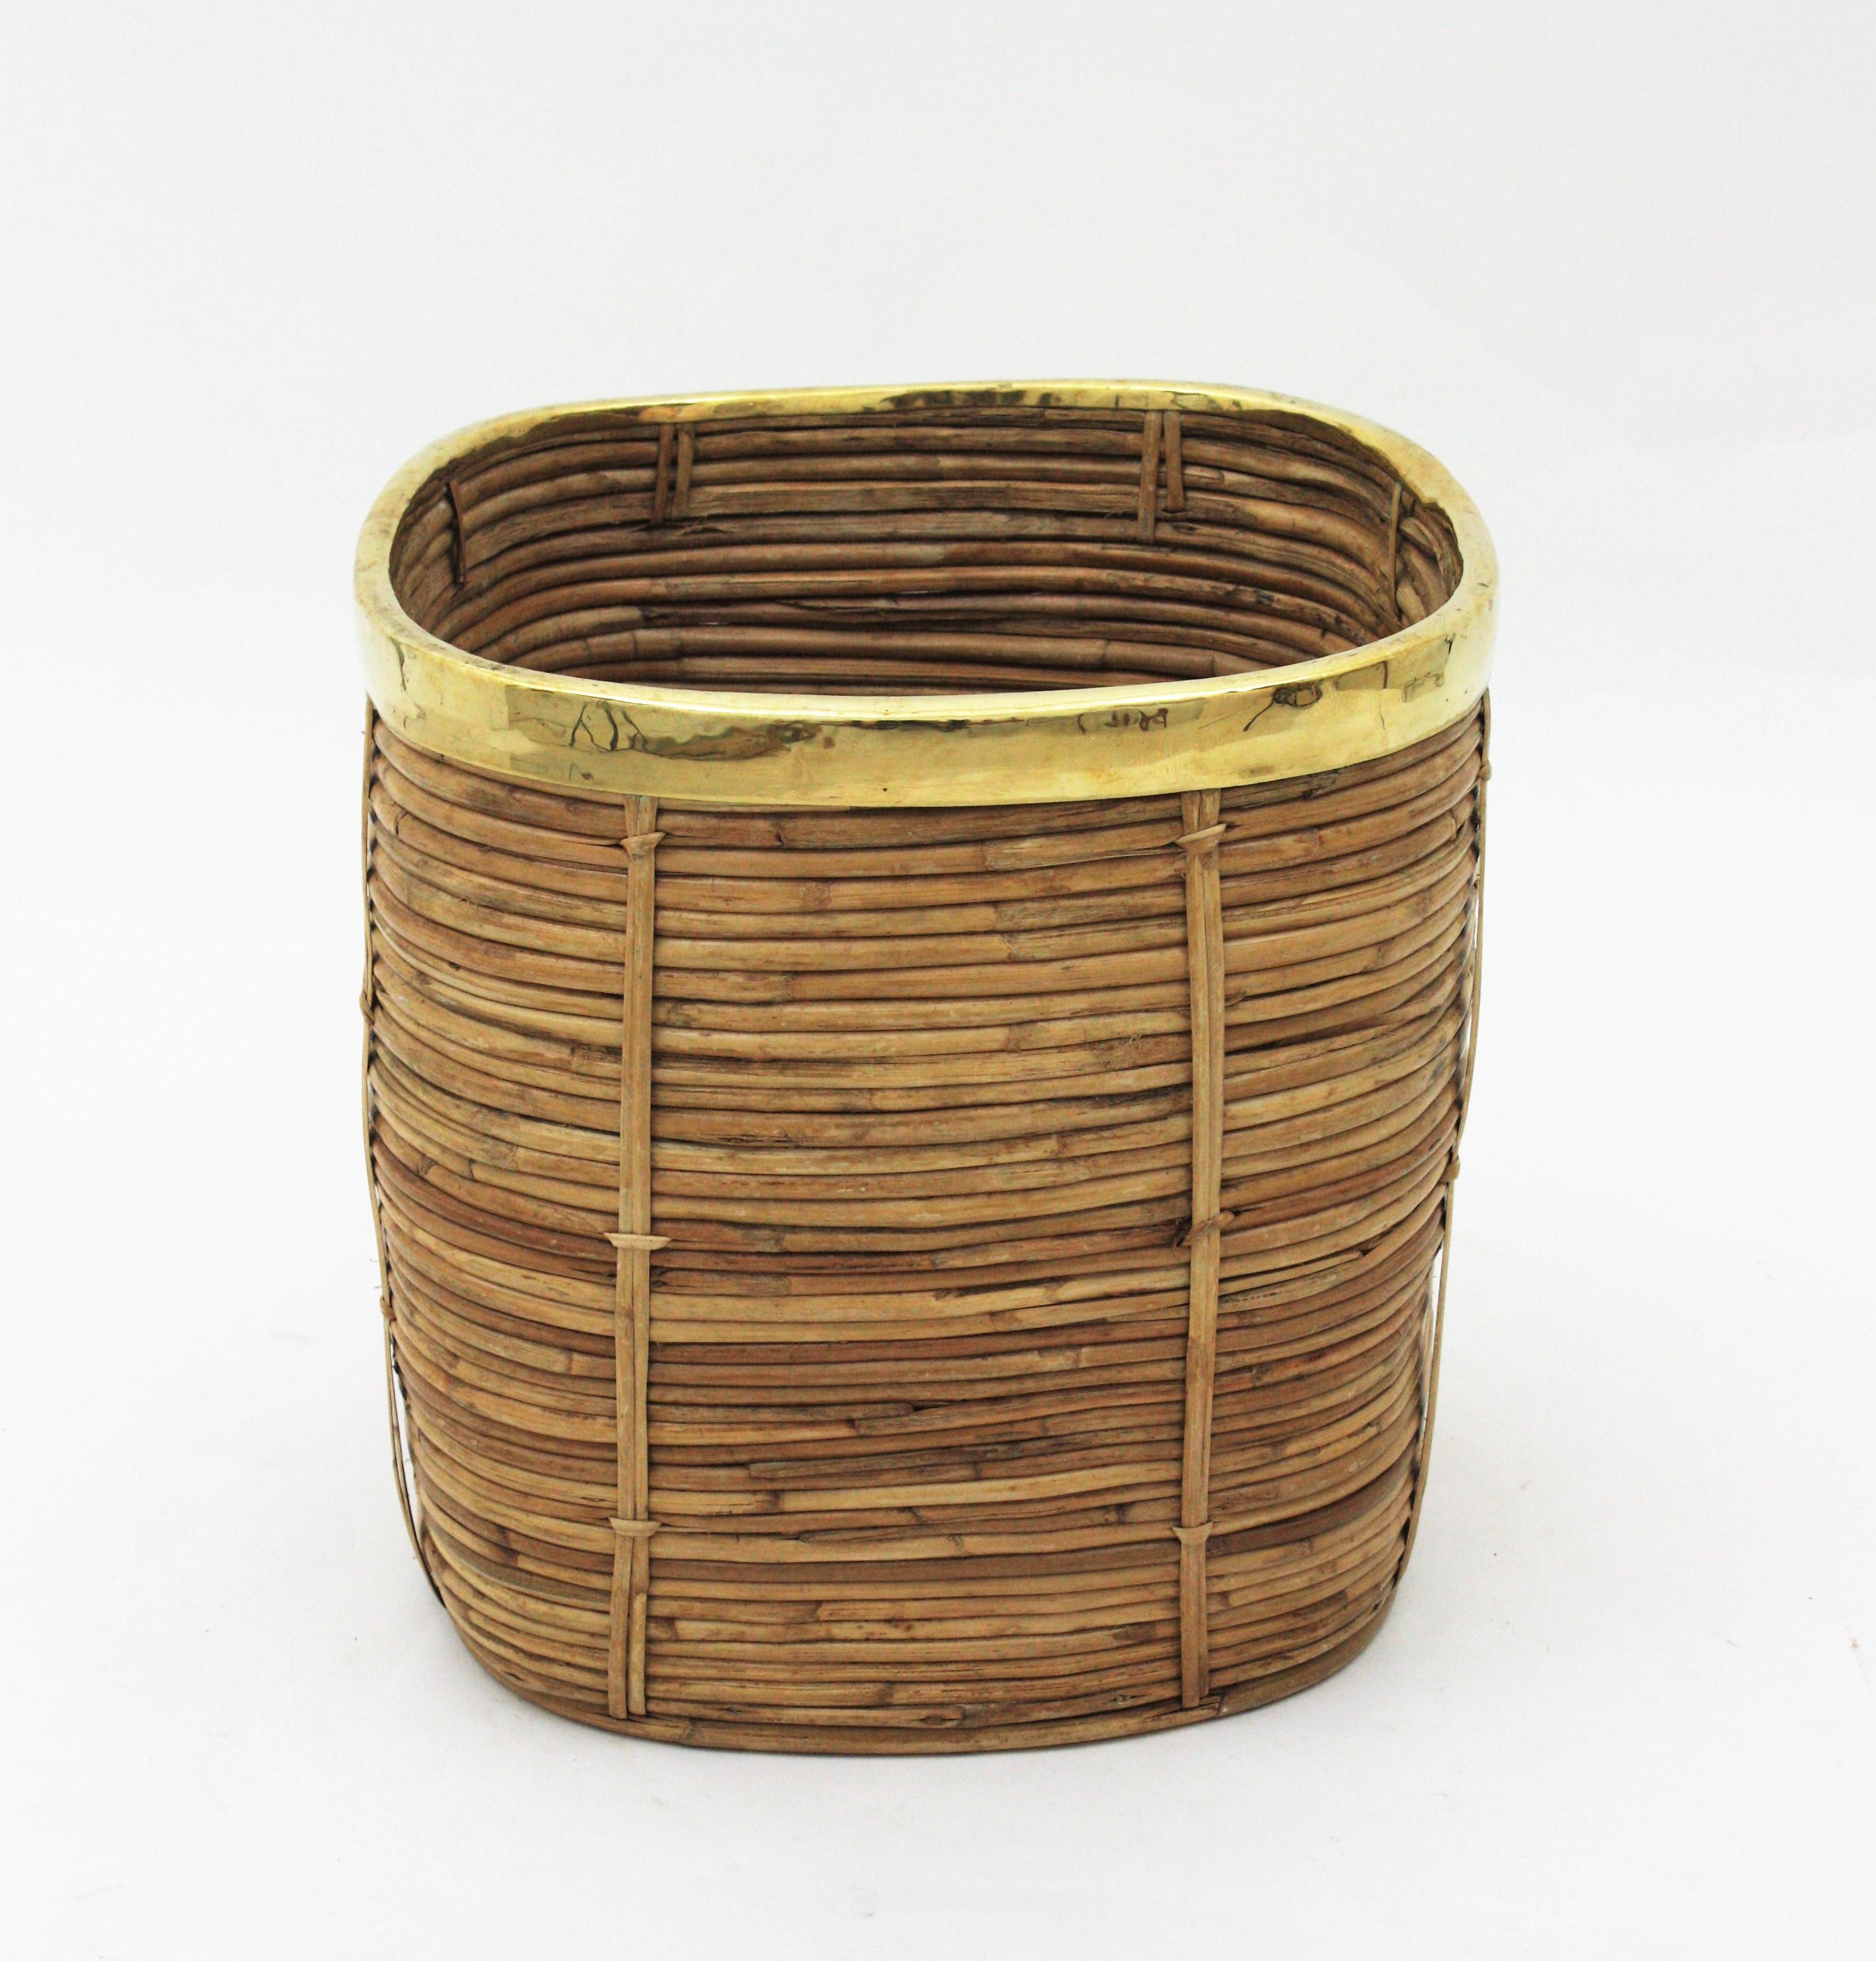 Beautiful Mid-Century Modern rattan and brass large square planter. 
Handcrafted in Italy, 1970s. 
Square shape with gilded brass rim. 
Inspired on Gabriella Crespi designs.
It can be used as planter, storage basket or paper bin.
Very good